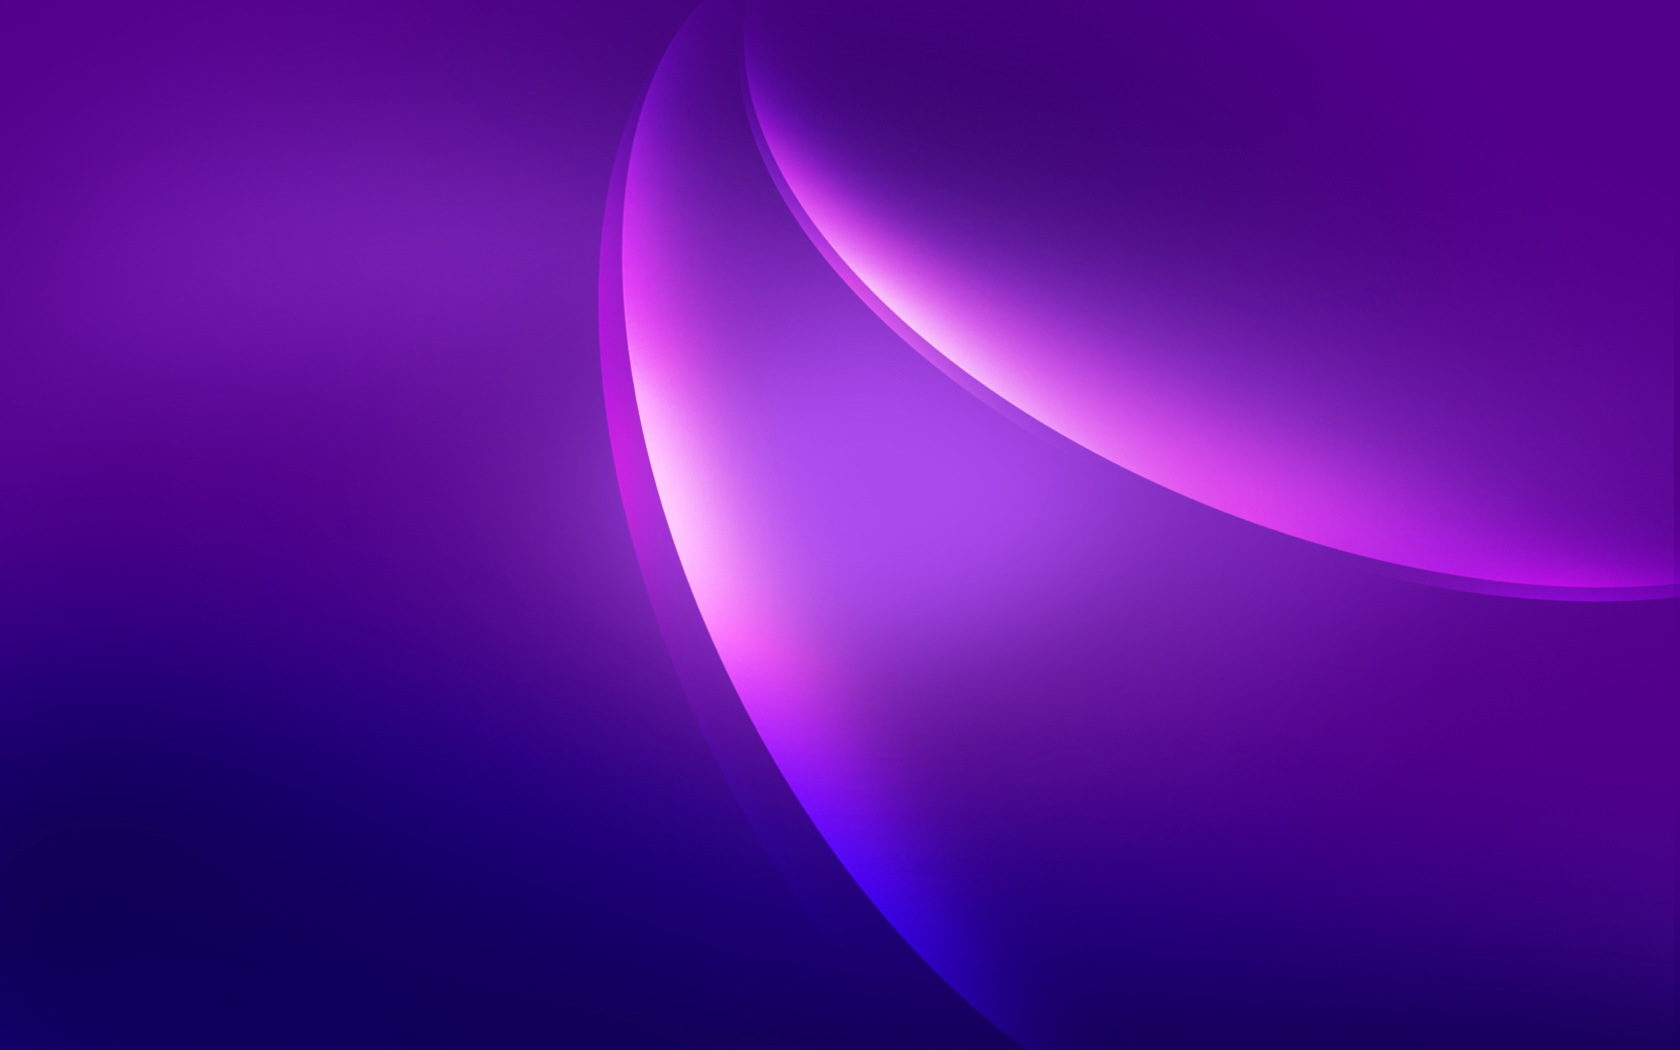 11464 1280x1024 PC pictures for free, download background, violet 1280x1024 wallpapers on your desktop